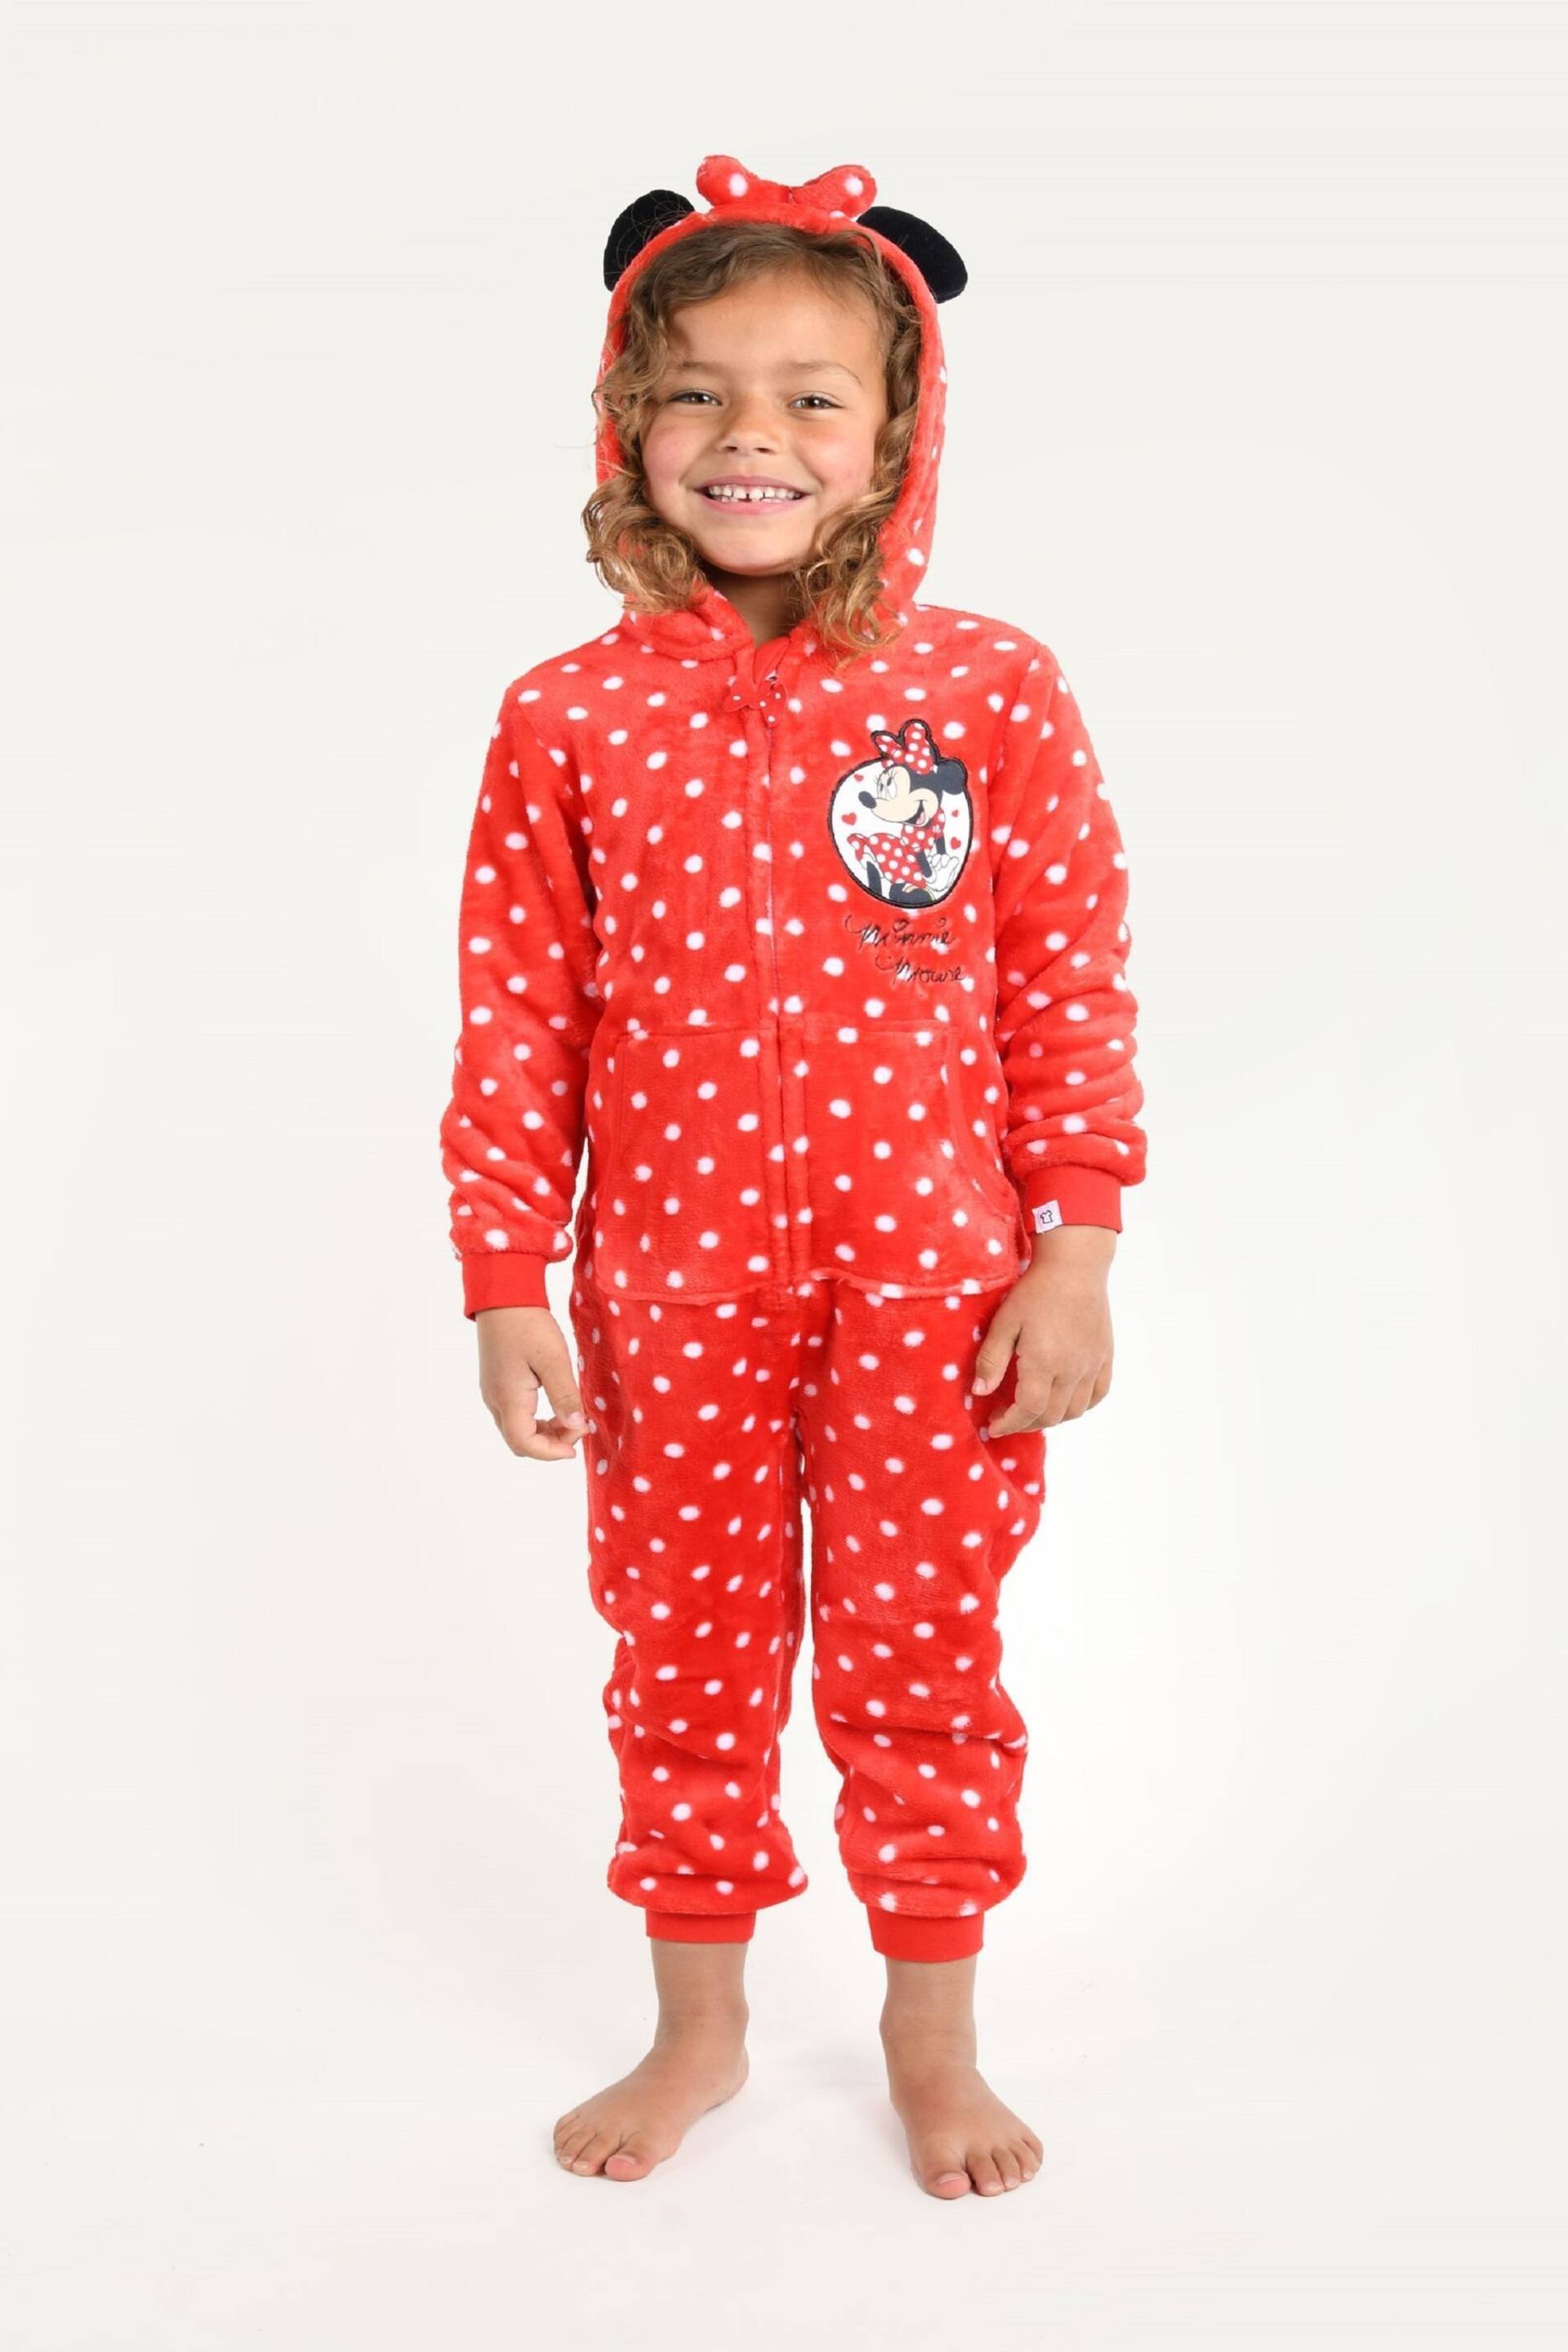 Brand Threads Red Disney Minnie Mouse Girls Hooded Onesie - Image 1 of 5